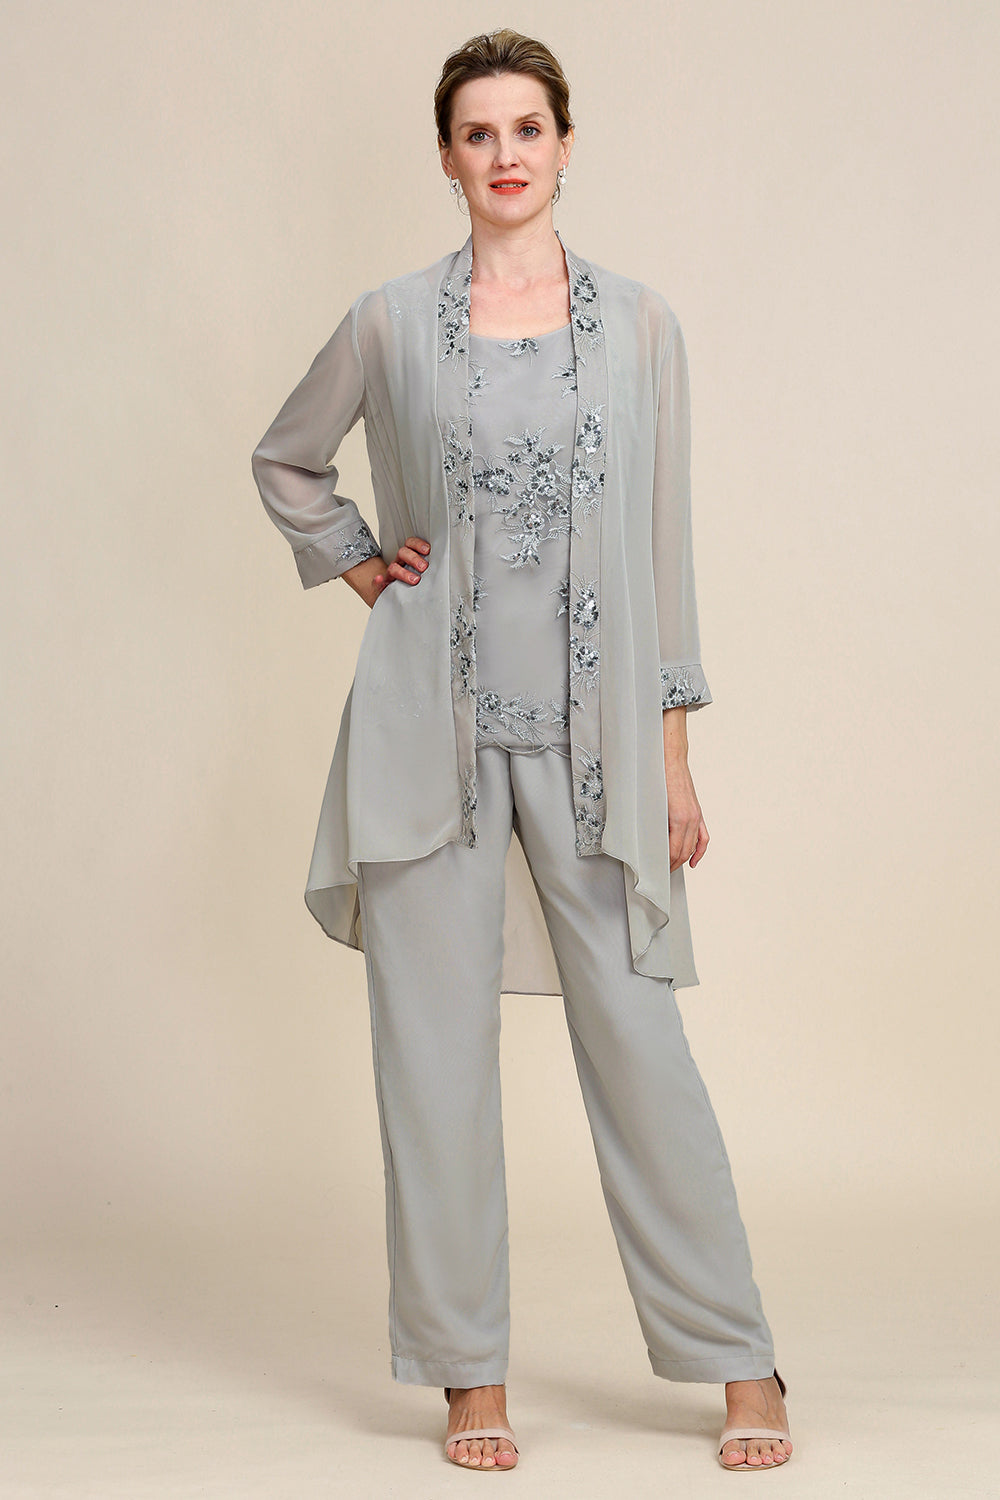 Zapaka Women Grey 3 Piece Mor of the Bride Pant Suits med spets